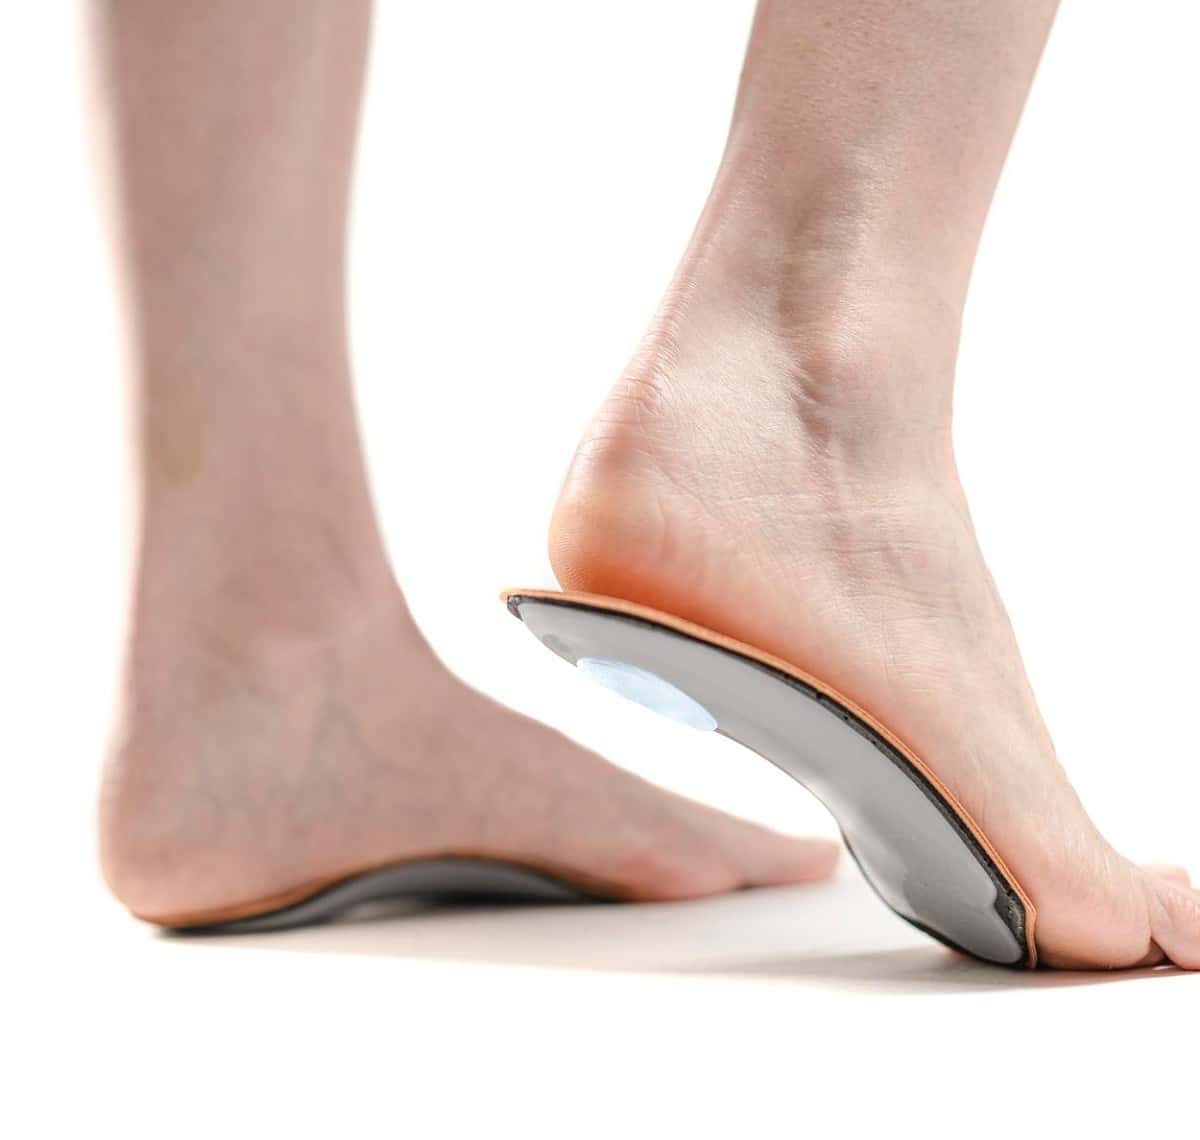 Woman standing in custom orthotics for posterior tibial tendonitis